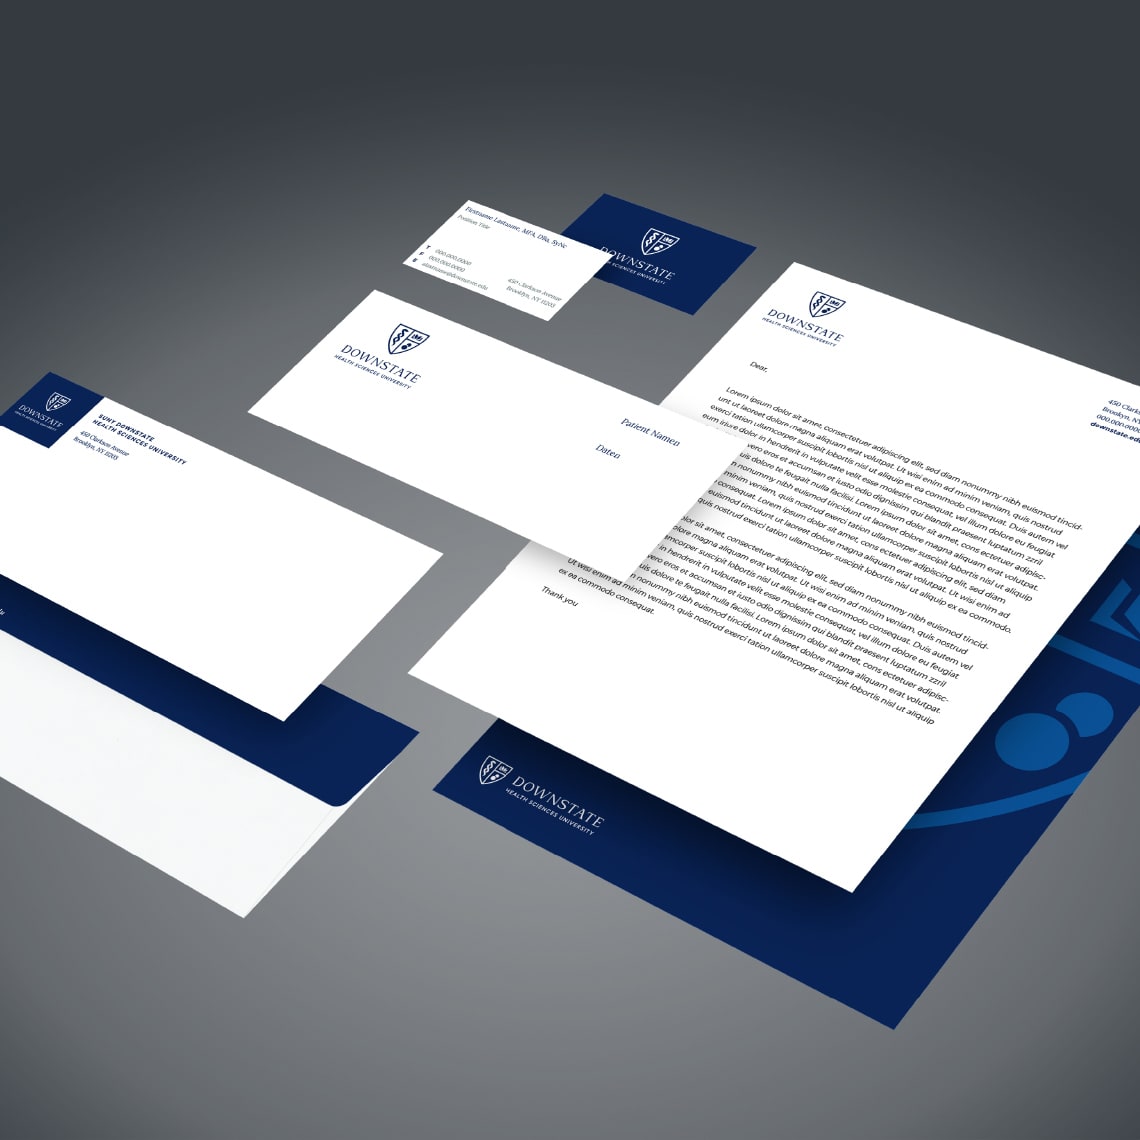 Examples of printed material including letter paper, envelope, business cards and folders